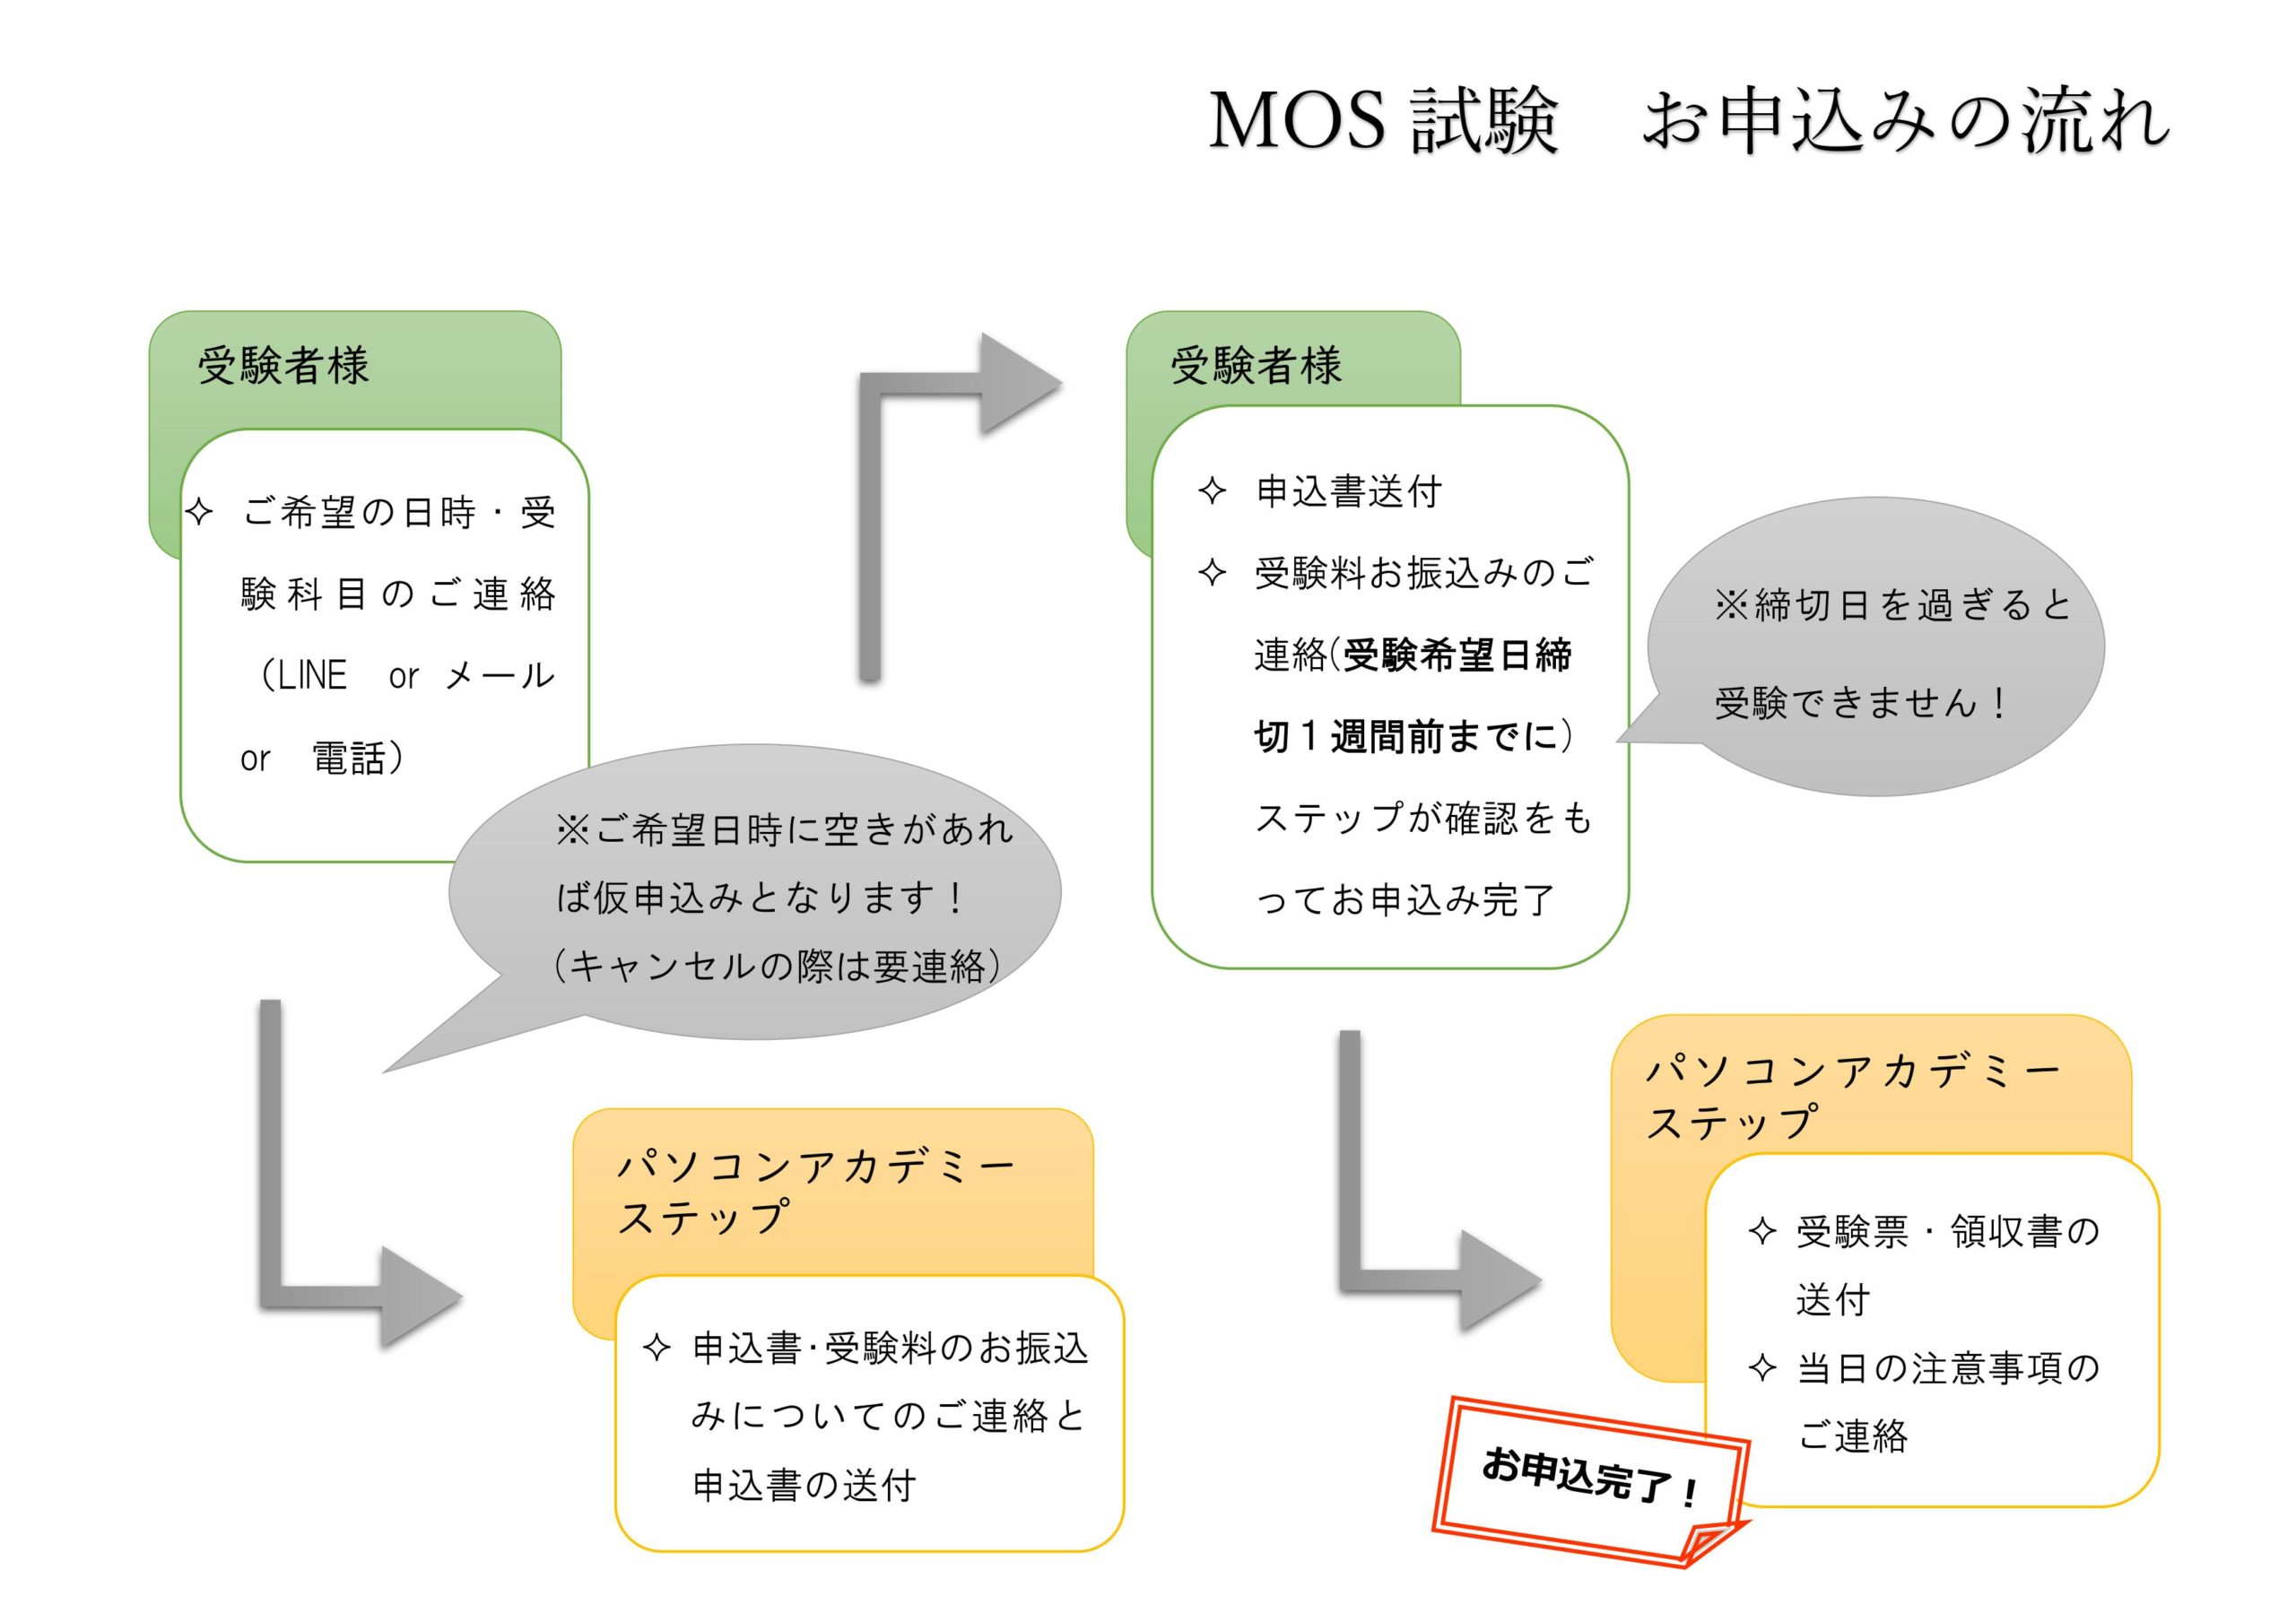 MOS試験申し込みの流れ